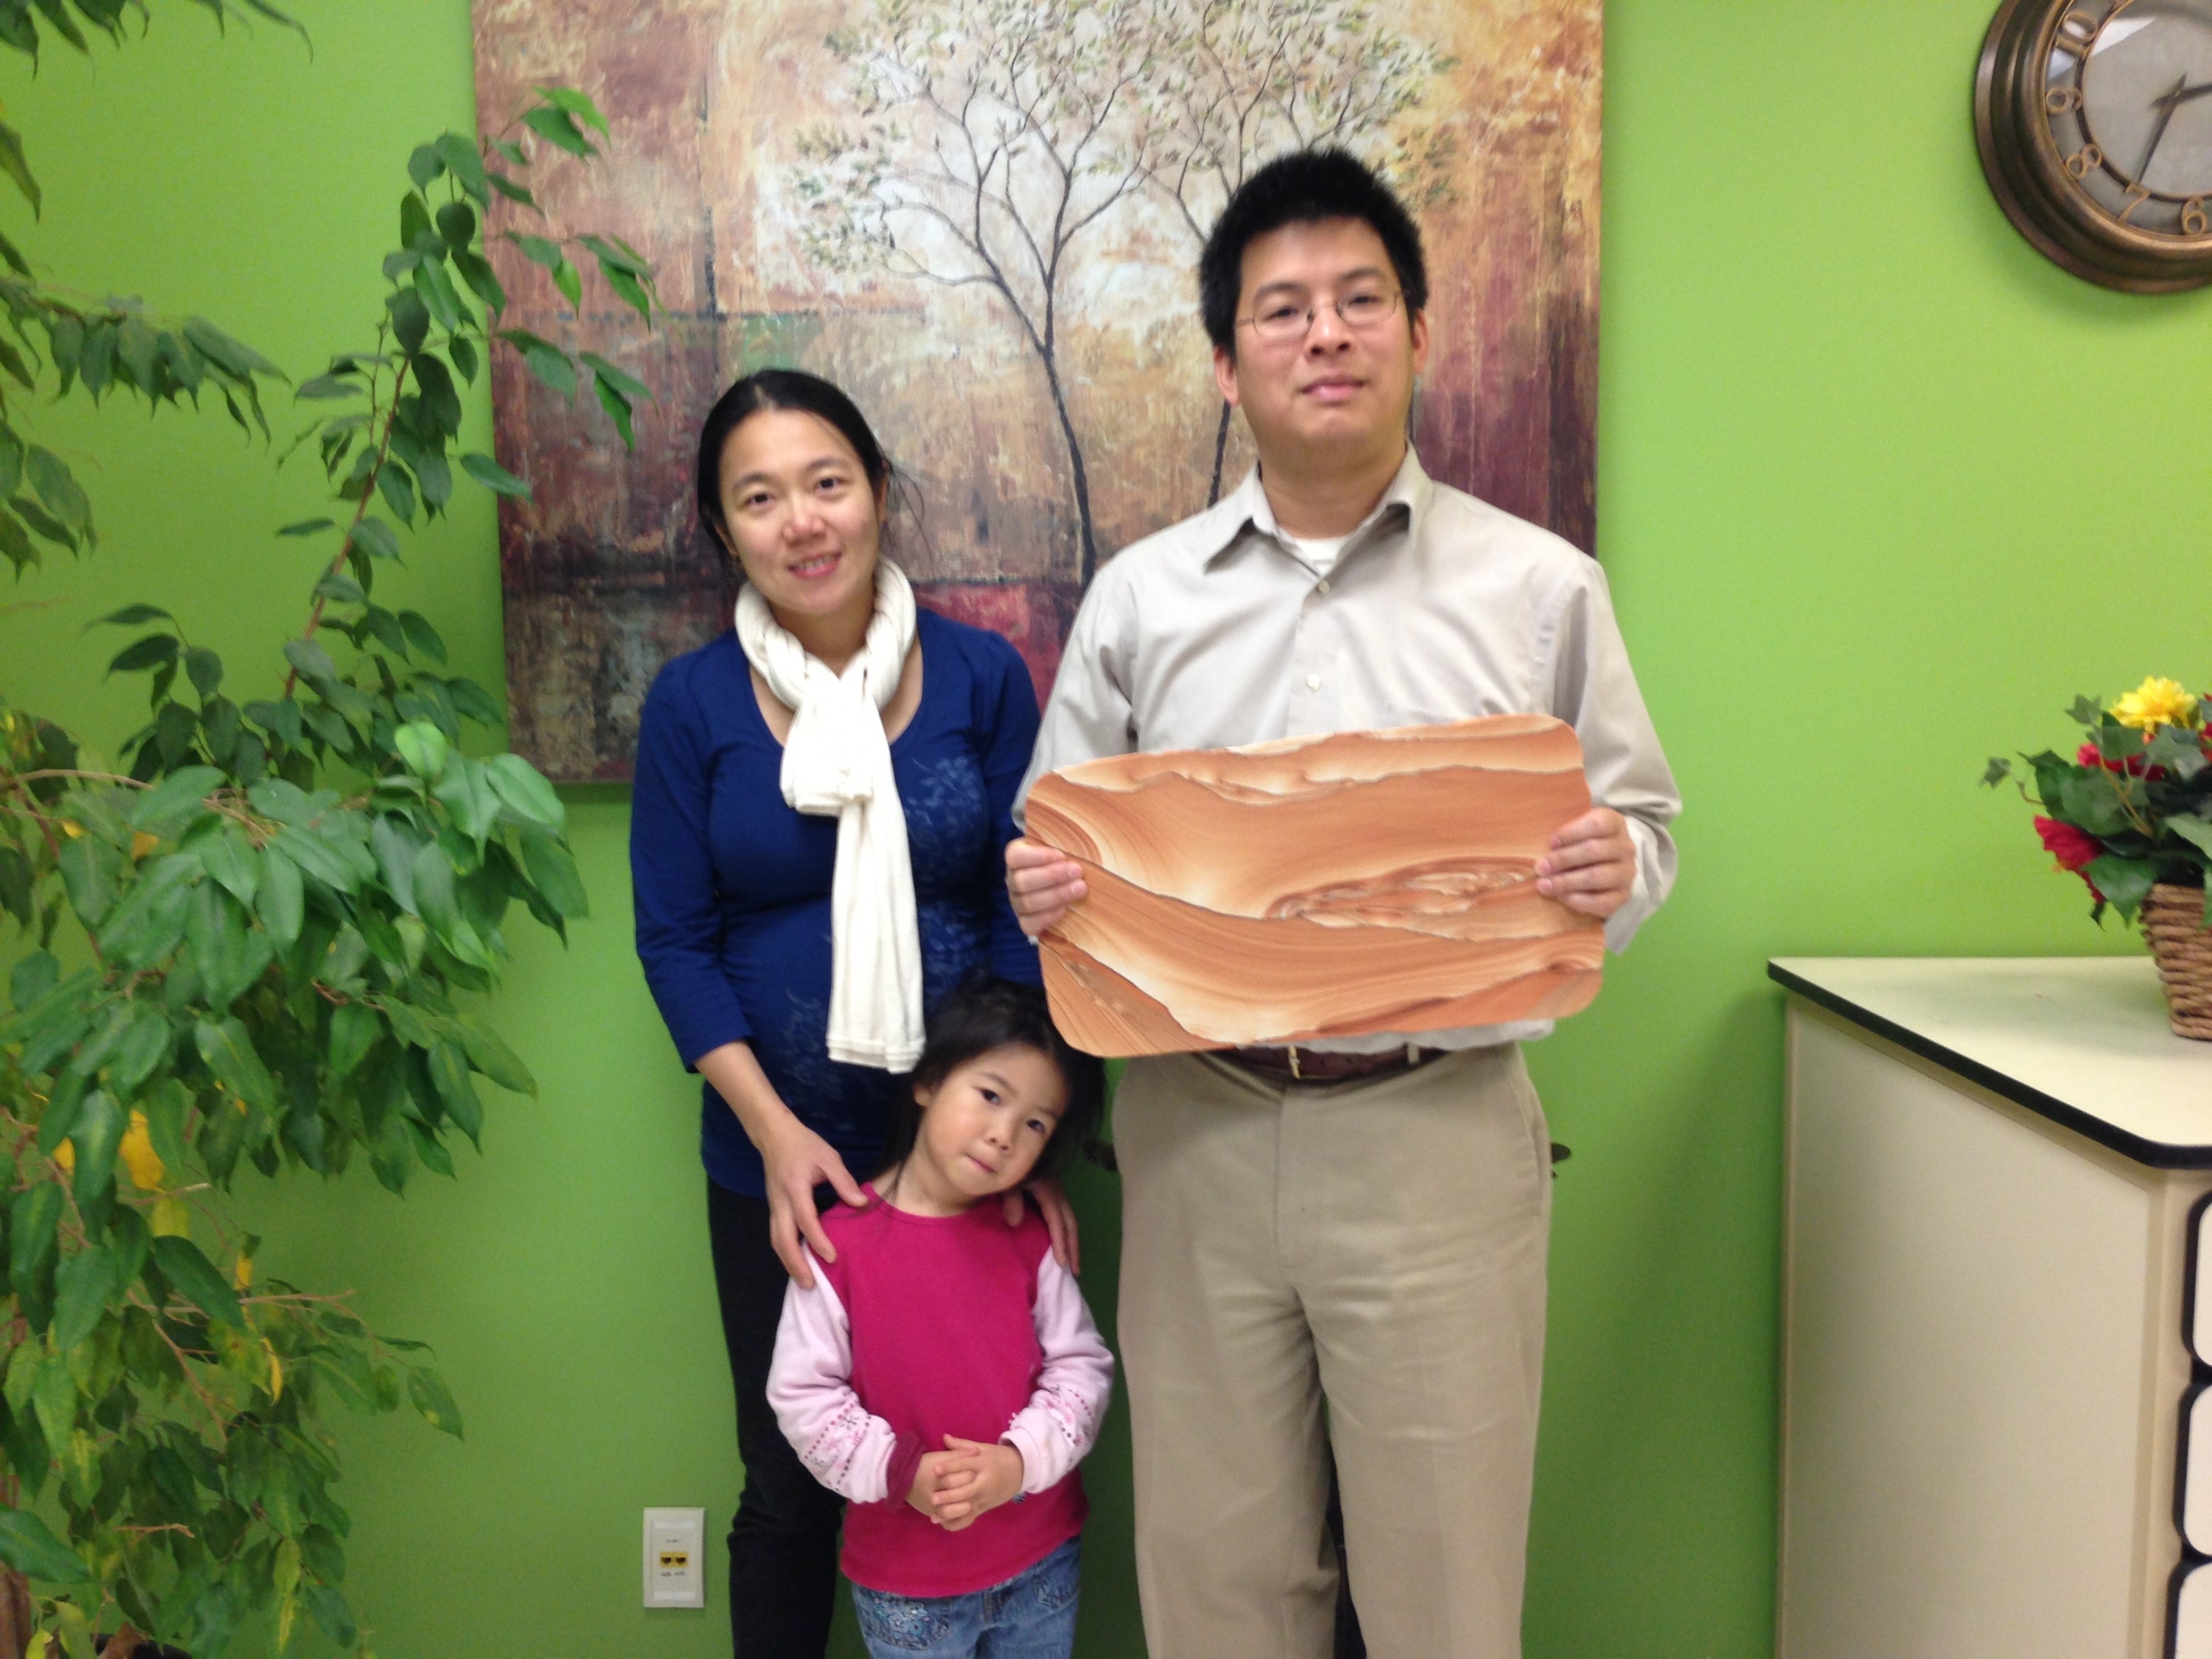 Chen Chi and her family with the picture sandstone 